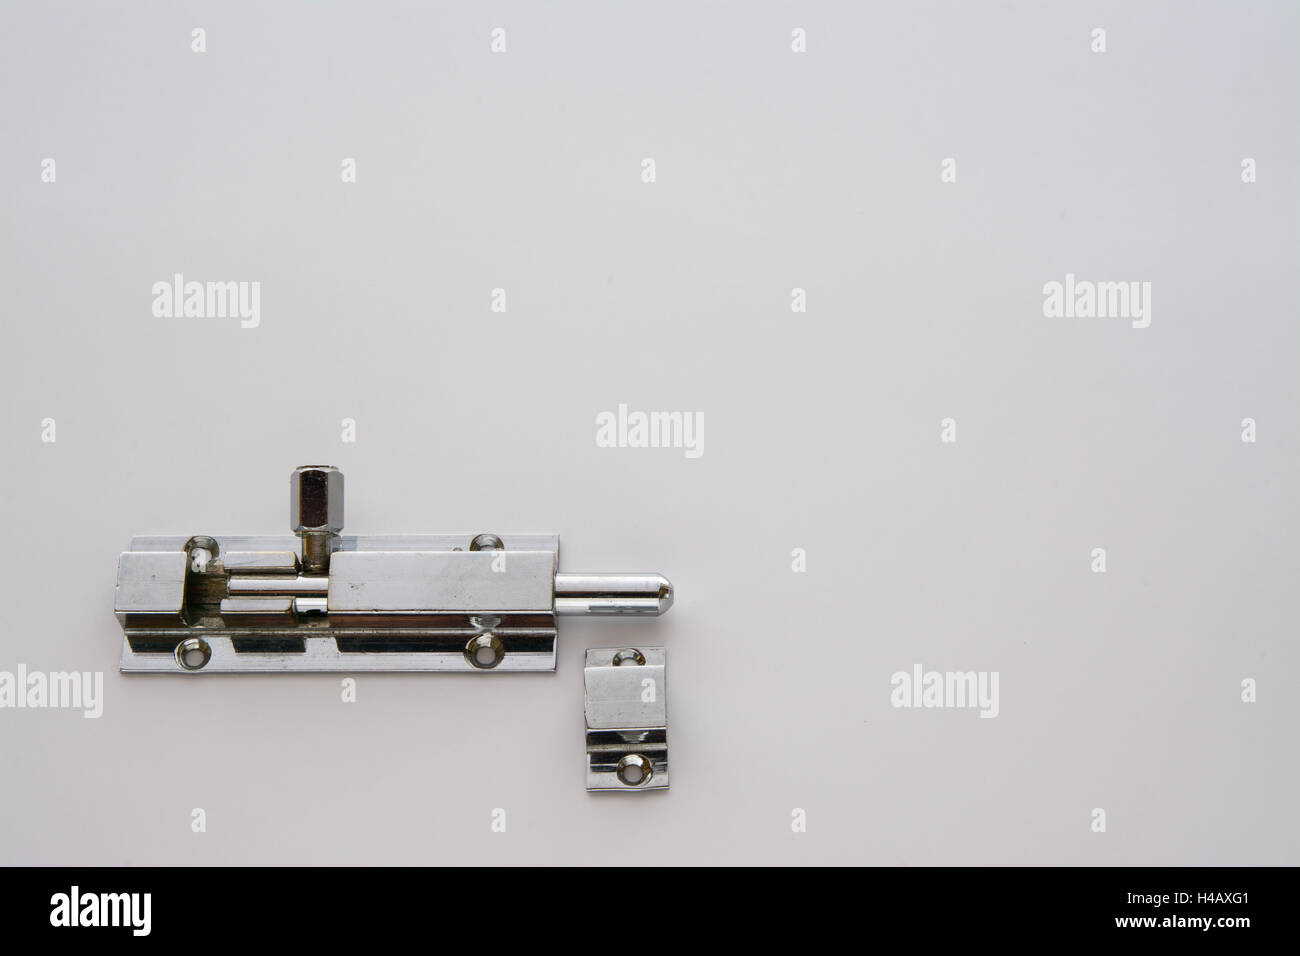 Silver door bolt with door jamb section obviously incorrectly placed Stock Photo